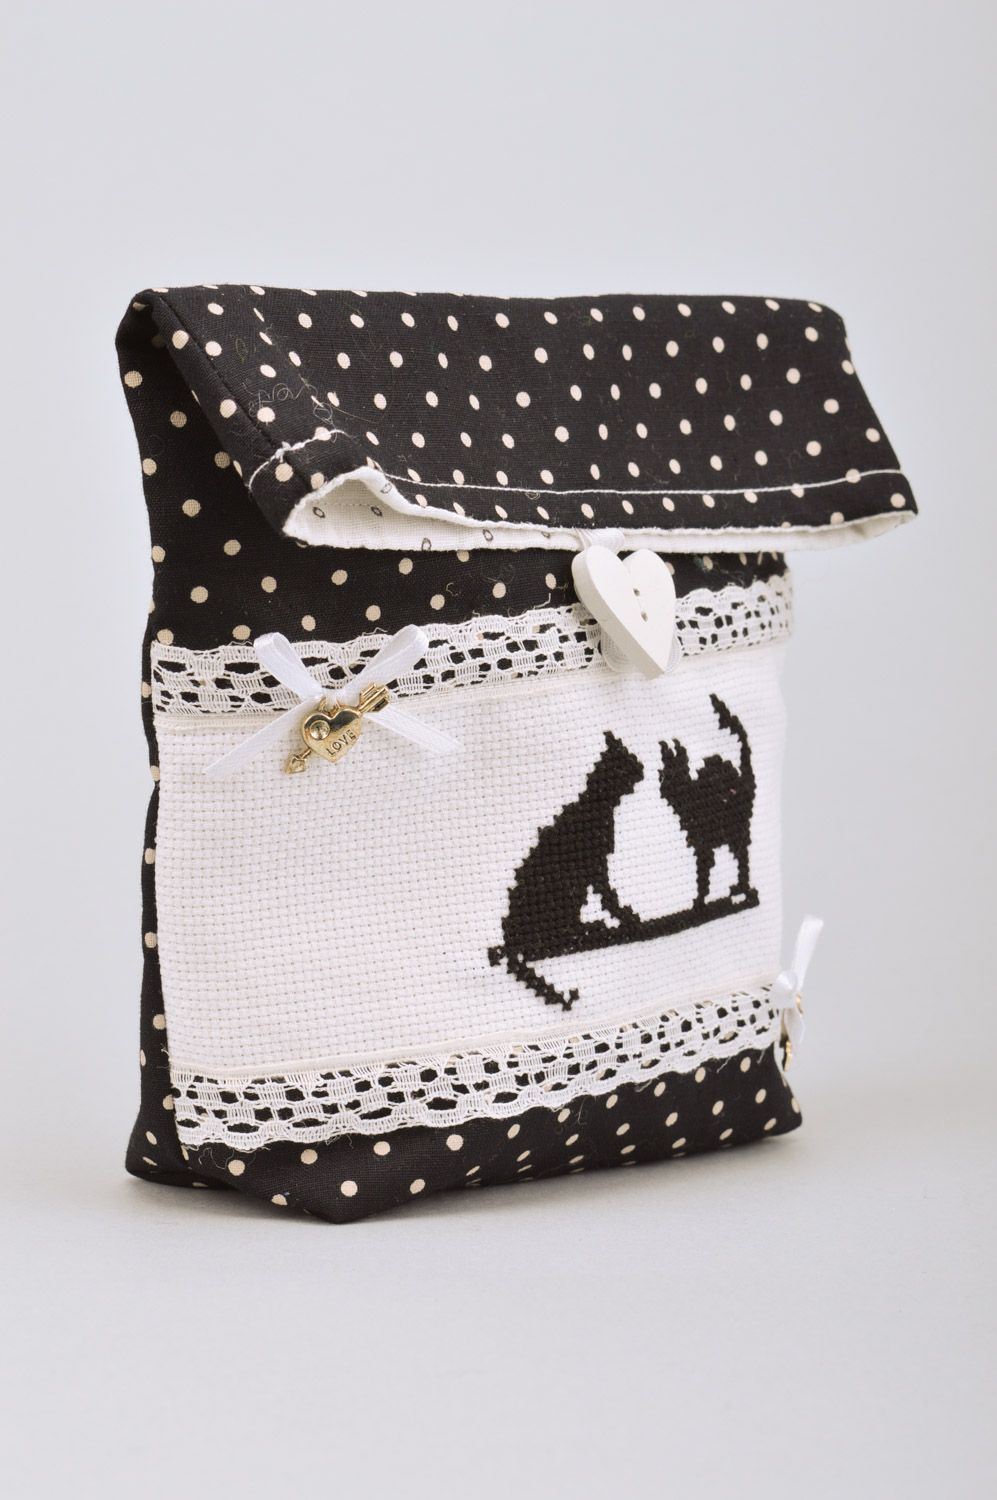 Handmade cosmetics bag sewn of polka dot cotton with cross stitch embroidery  photo 2